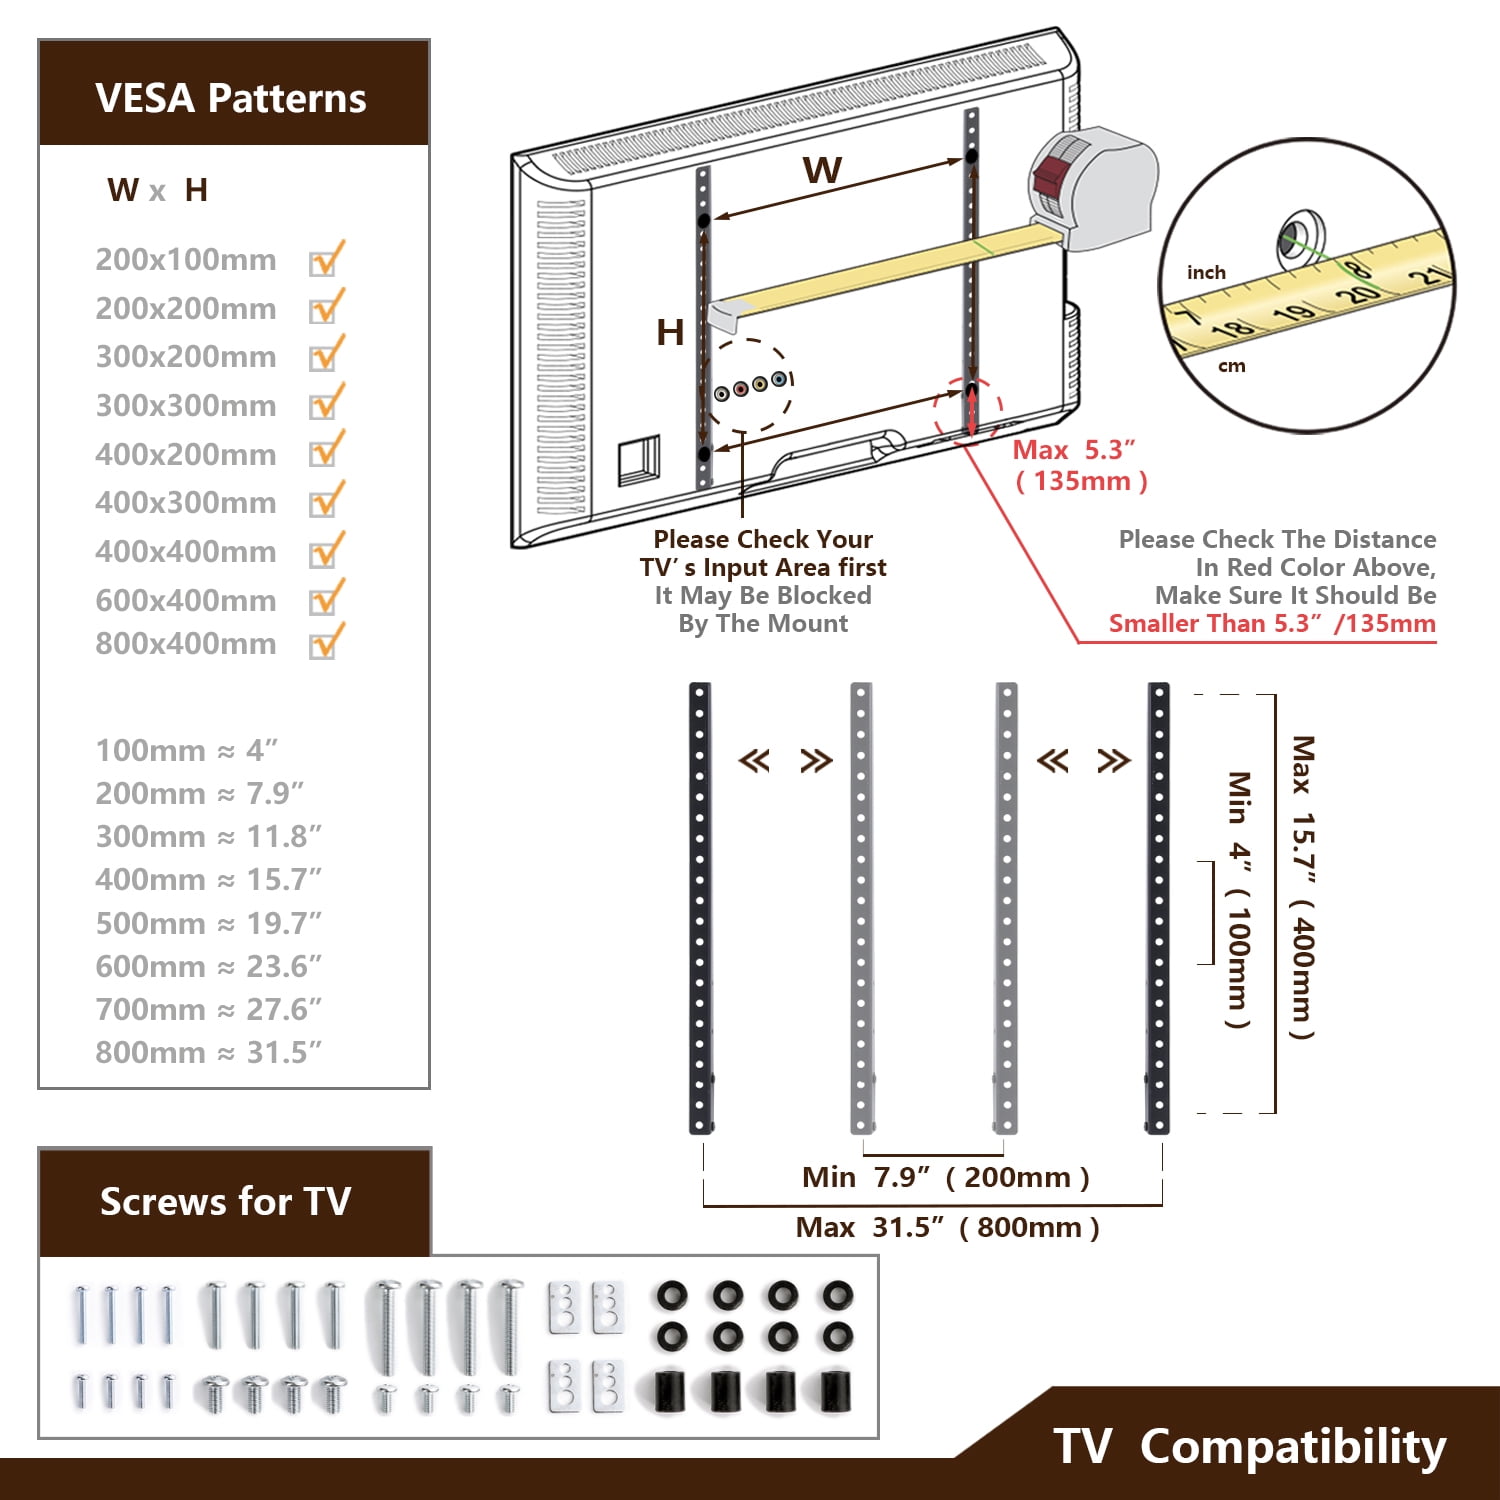 Universal Tabletop TV Stand TV Legs for Most 27 32 40 42 43 49 50 55 60 65 inch TVs with Height Adjustment Max VESA 800mm x 500mm